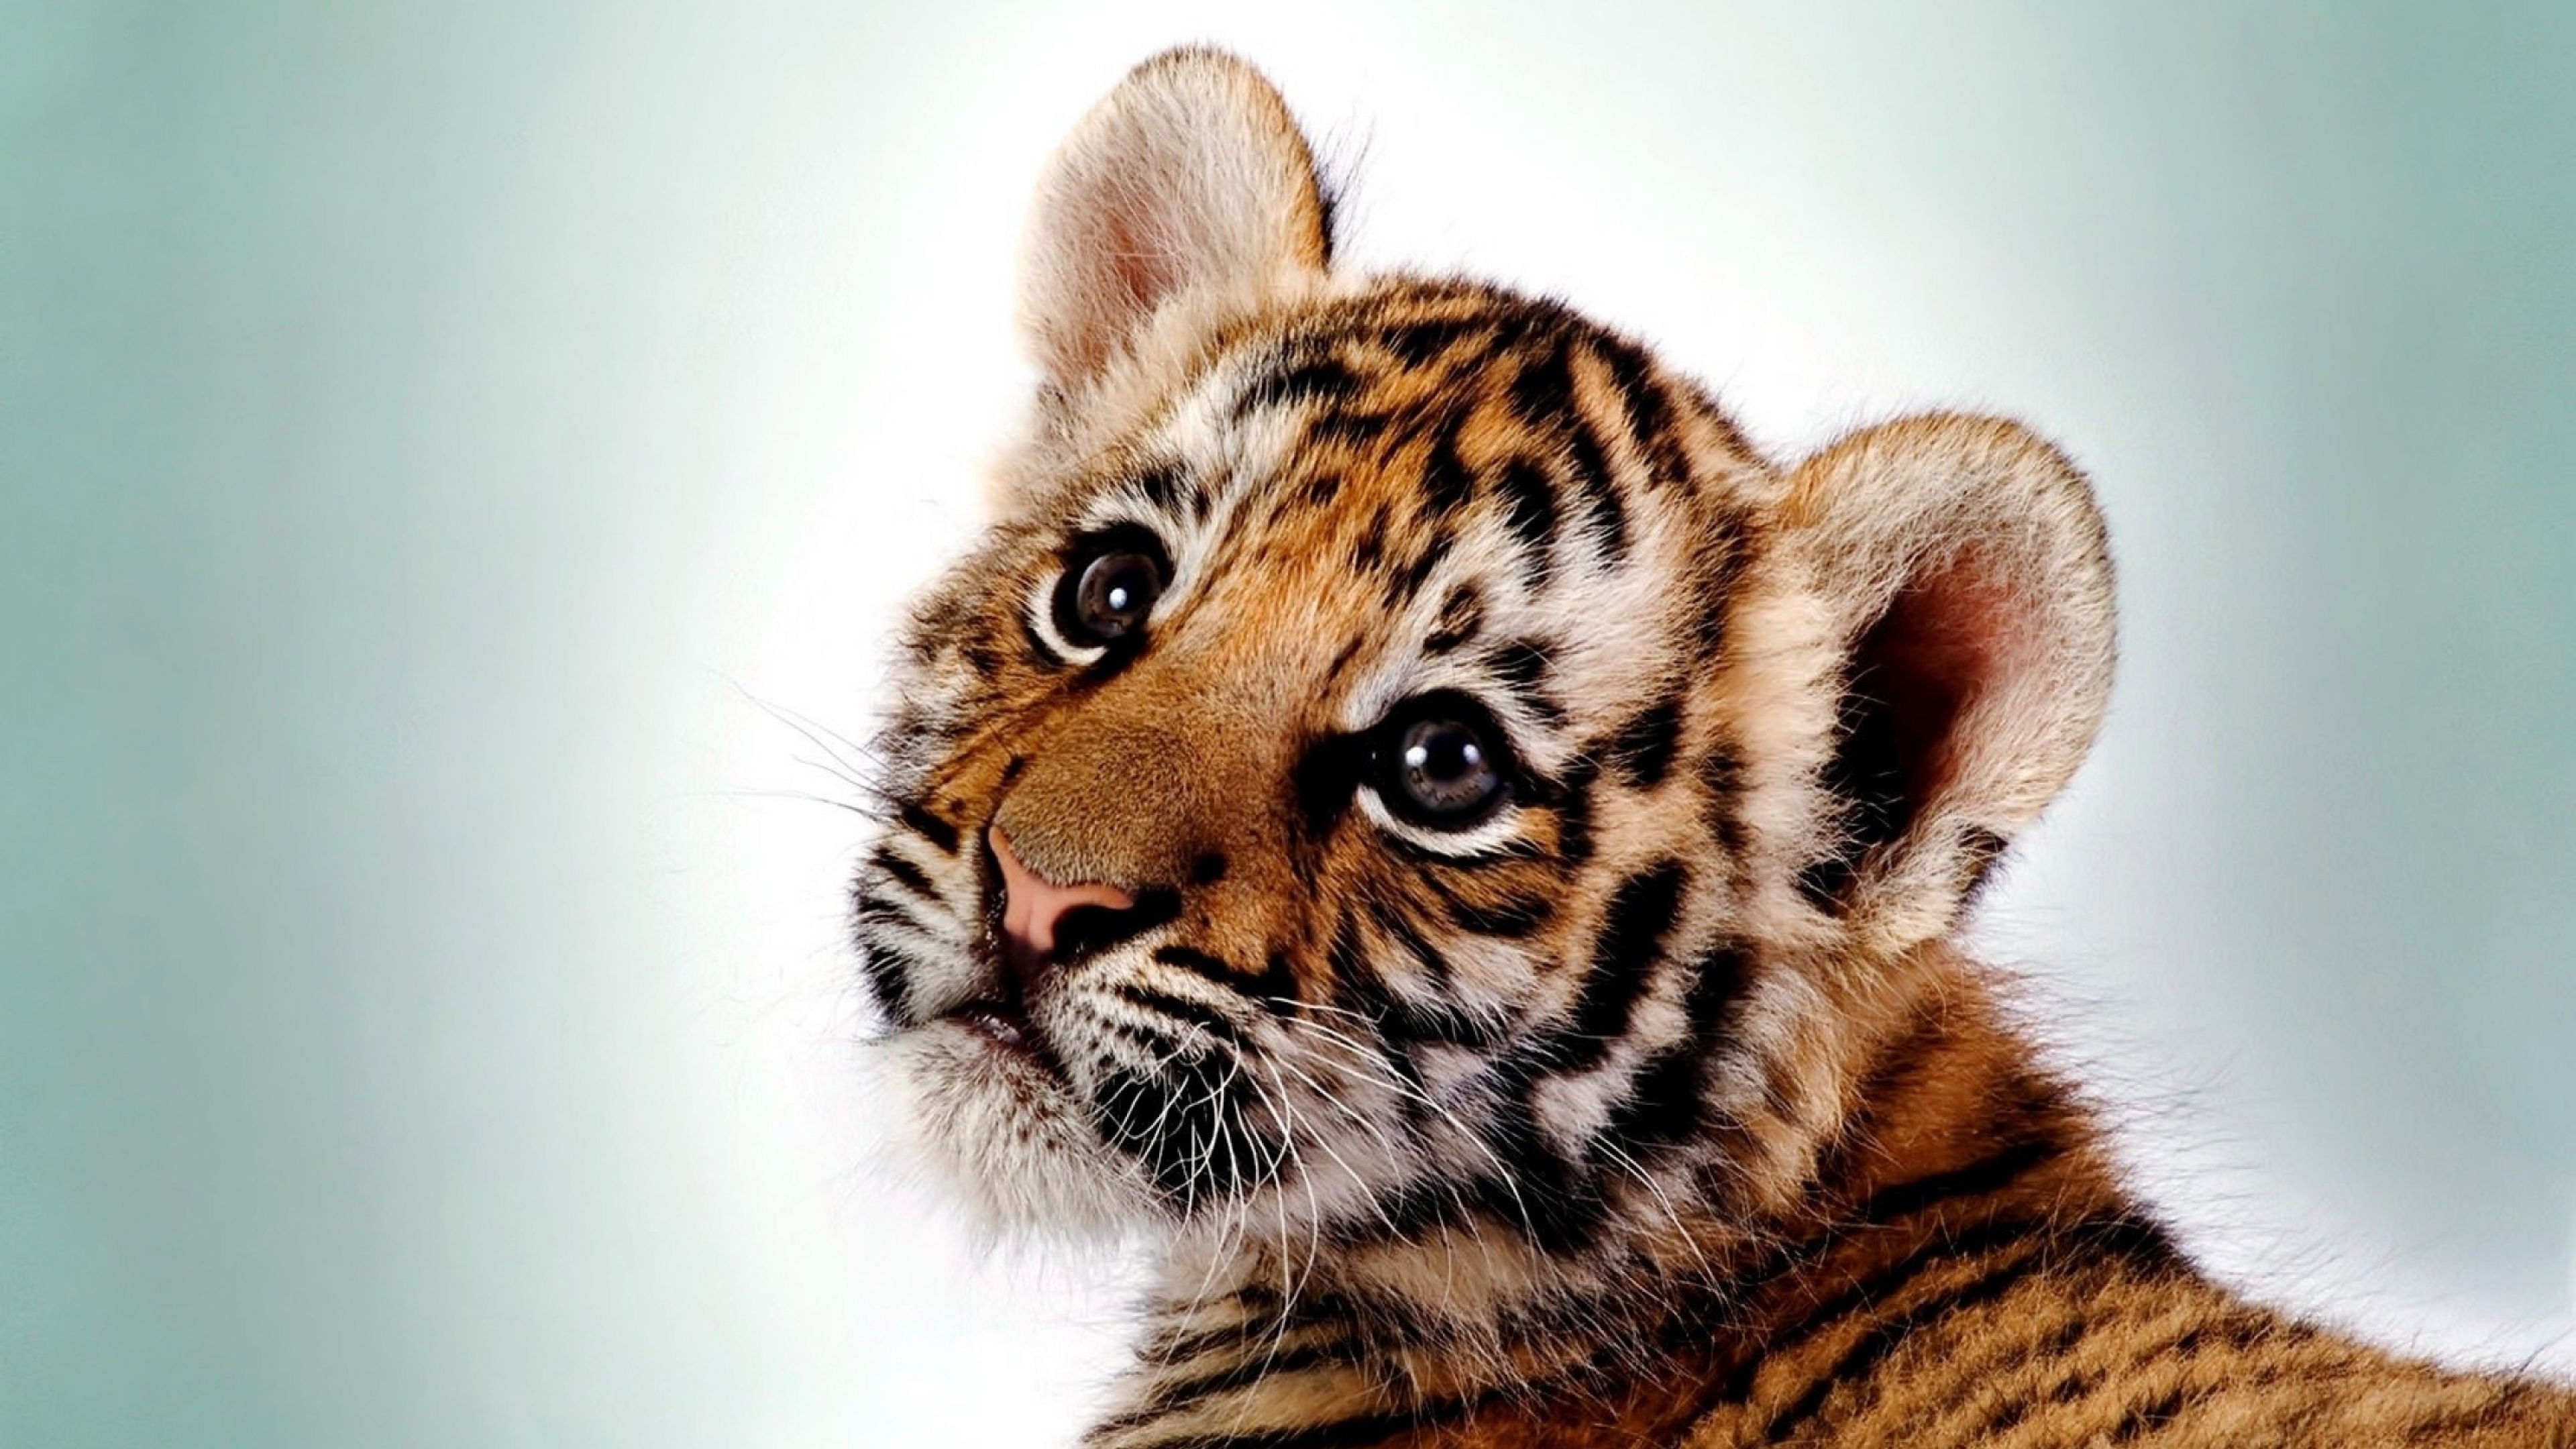 Awesome Tiger Images - Cute Wallpaper Tiger - HD Wallpaper 